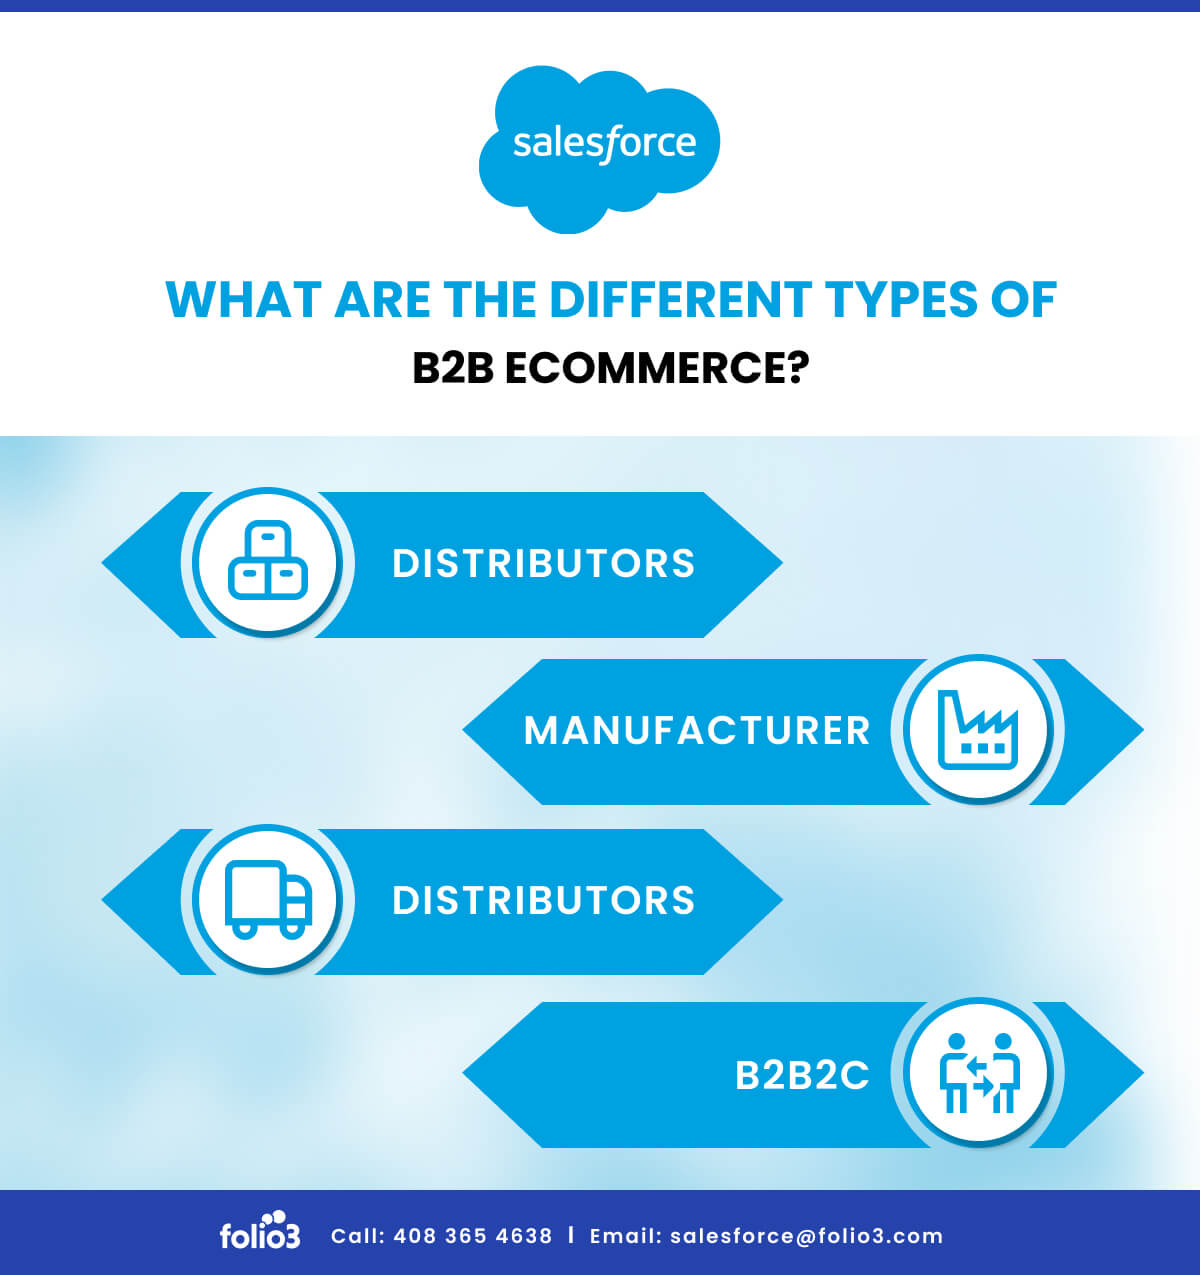 What Are the Different Types of B2B eCommerce?